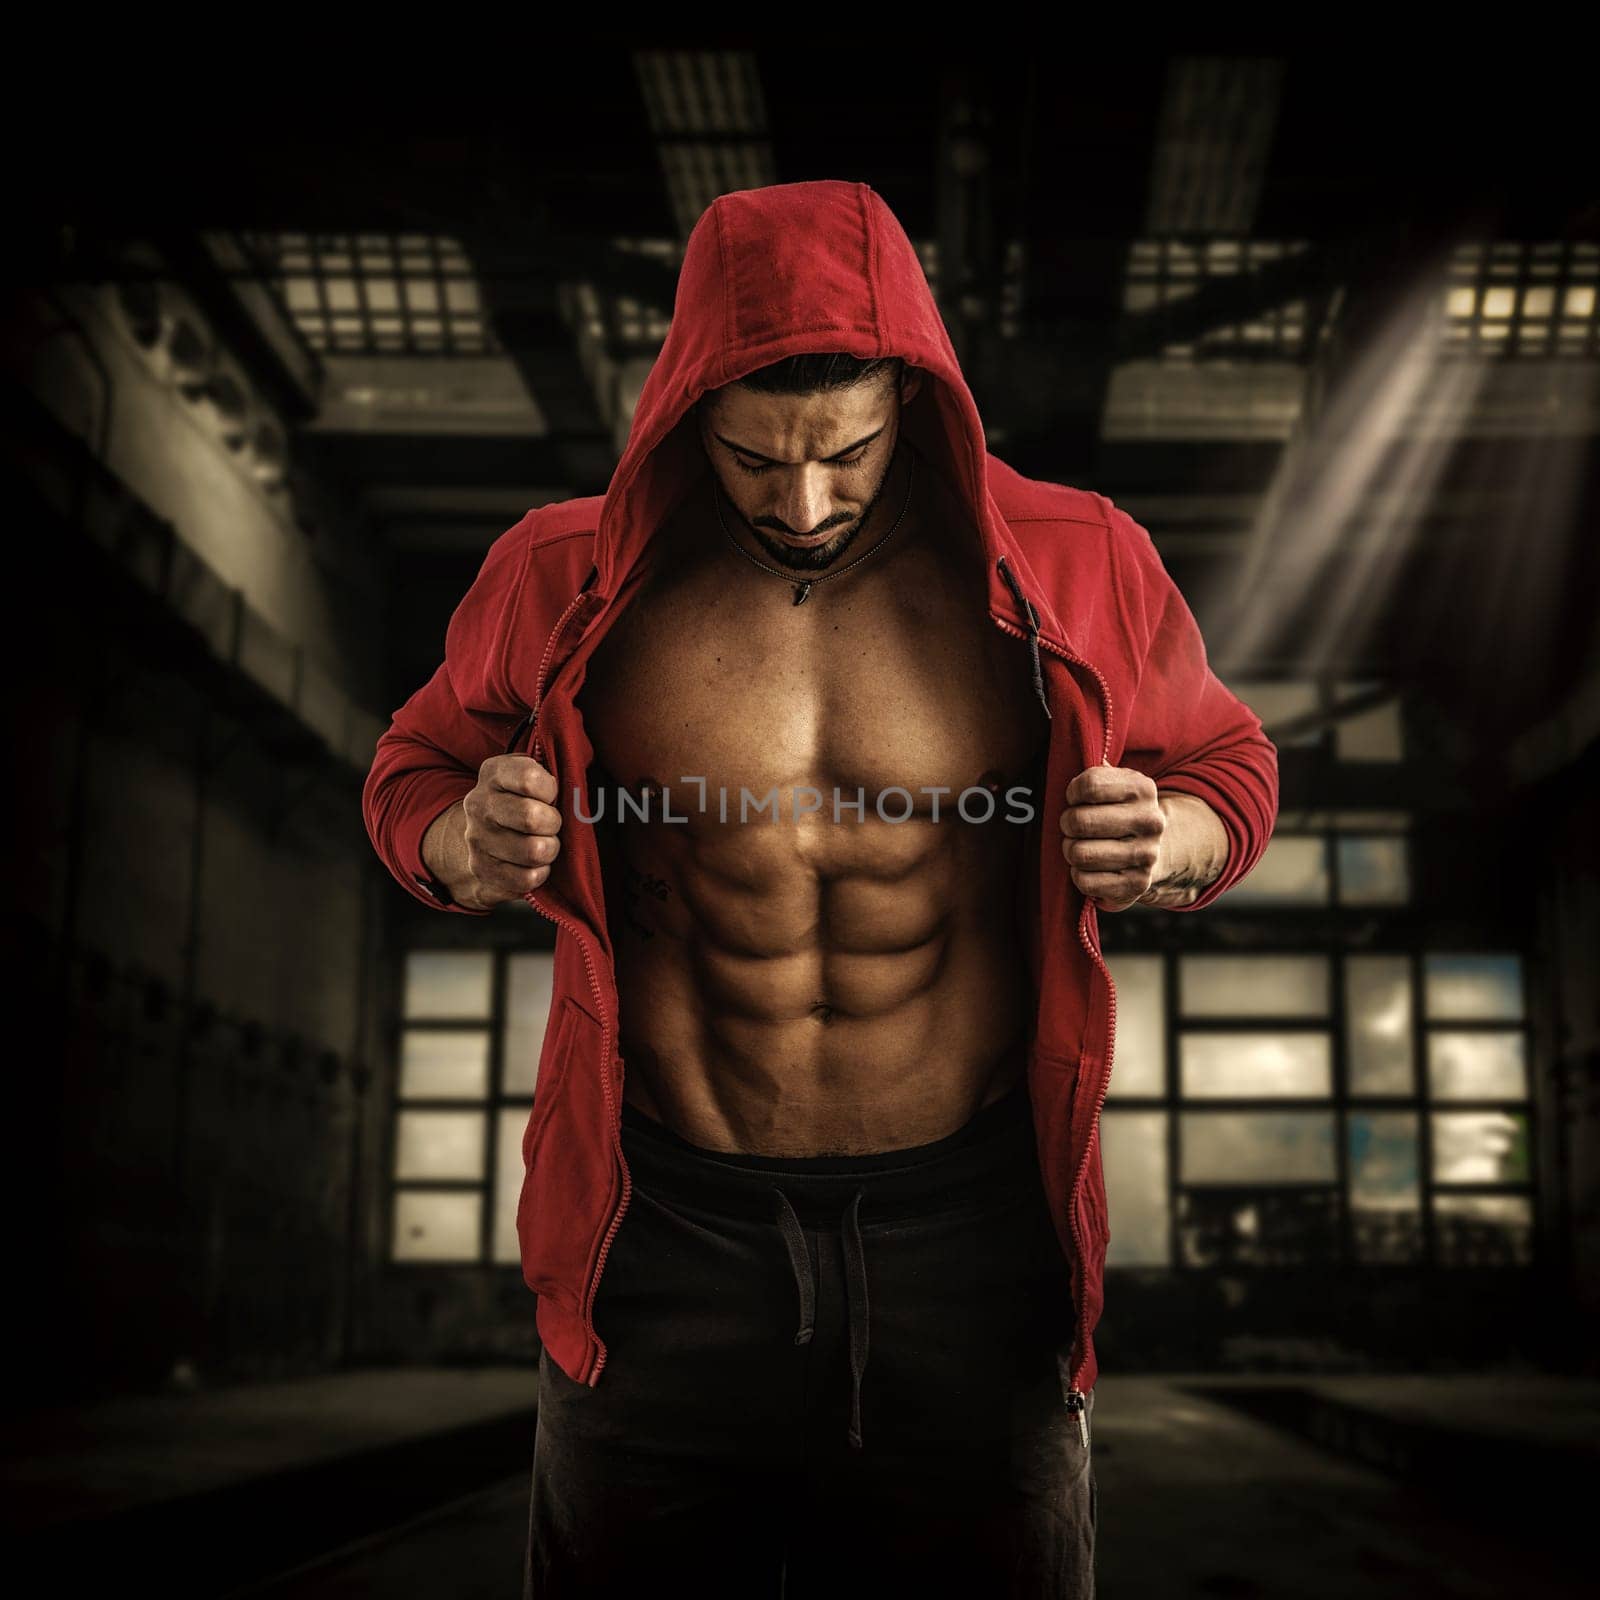 A shirtless man in a red jacket and black pants